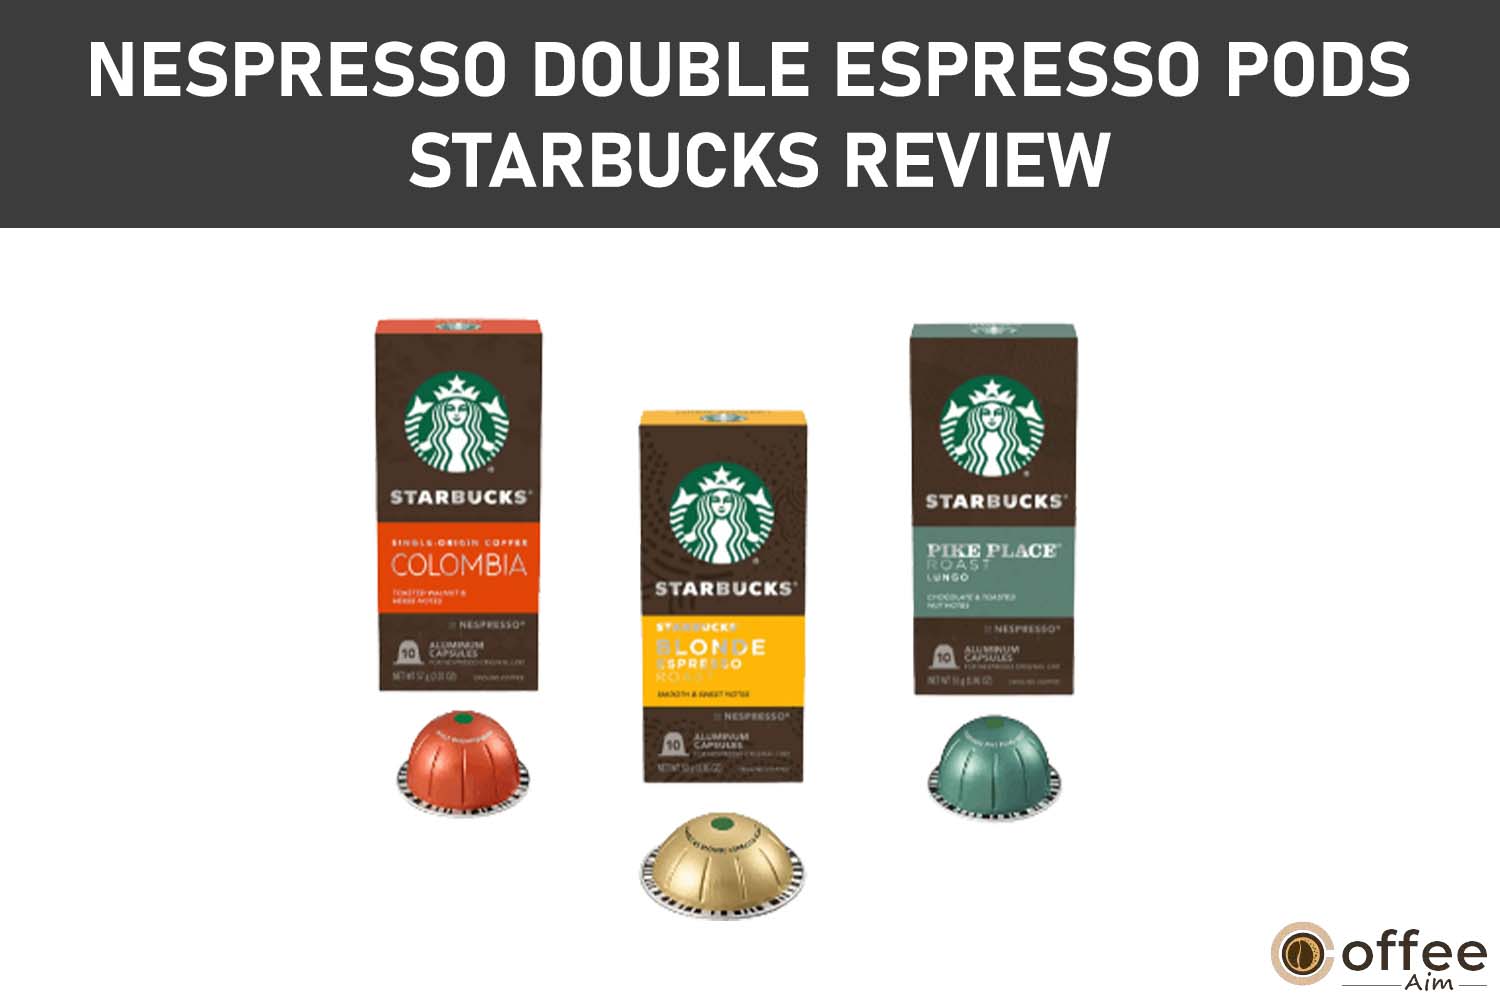 Featured image for the article "Nespresso Double Espresso Pods Starbucks Review"